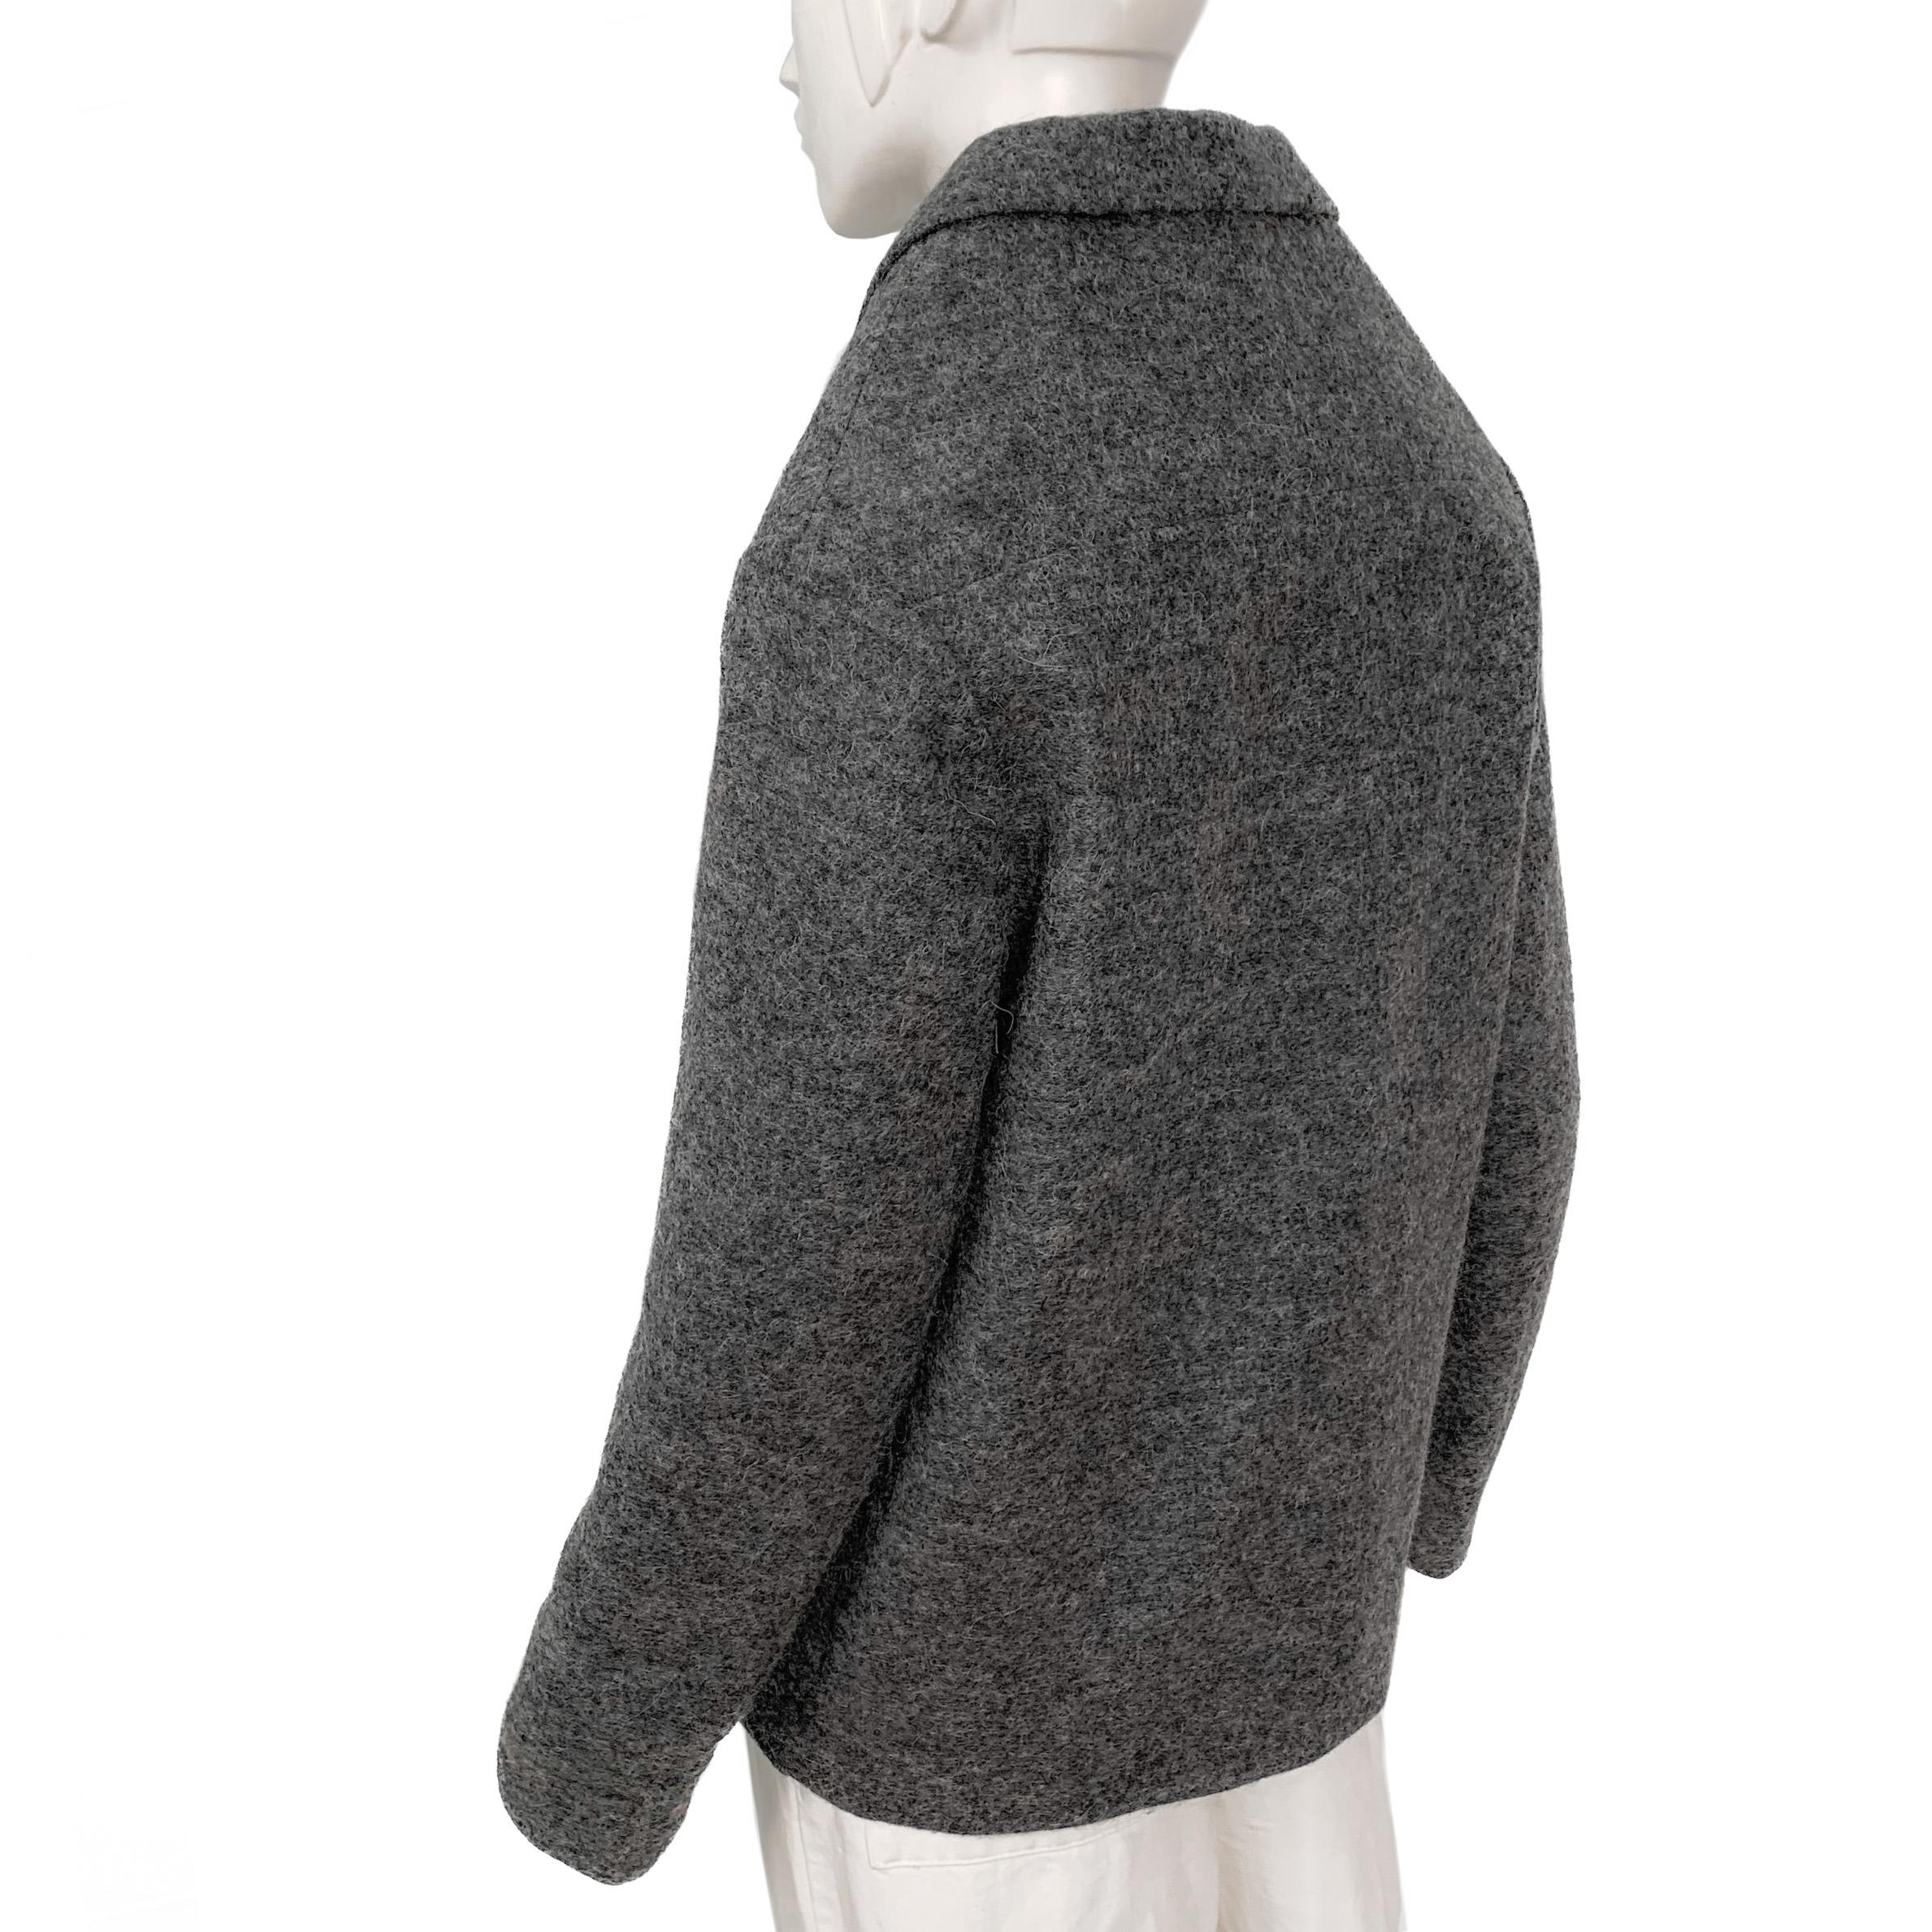 Fall 2010 mr. Margiela's very last RTW collection grey wool deconstructed blazer For Sale 3